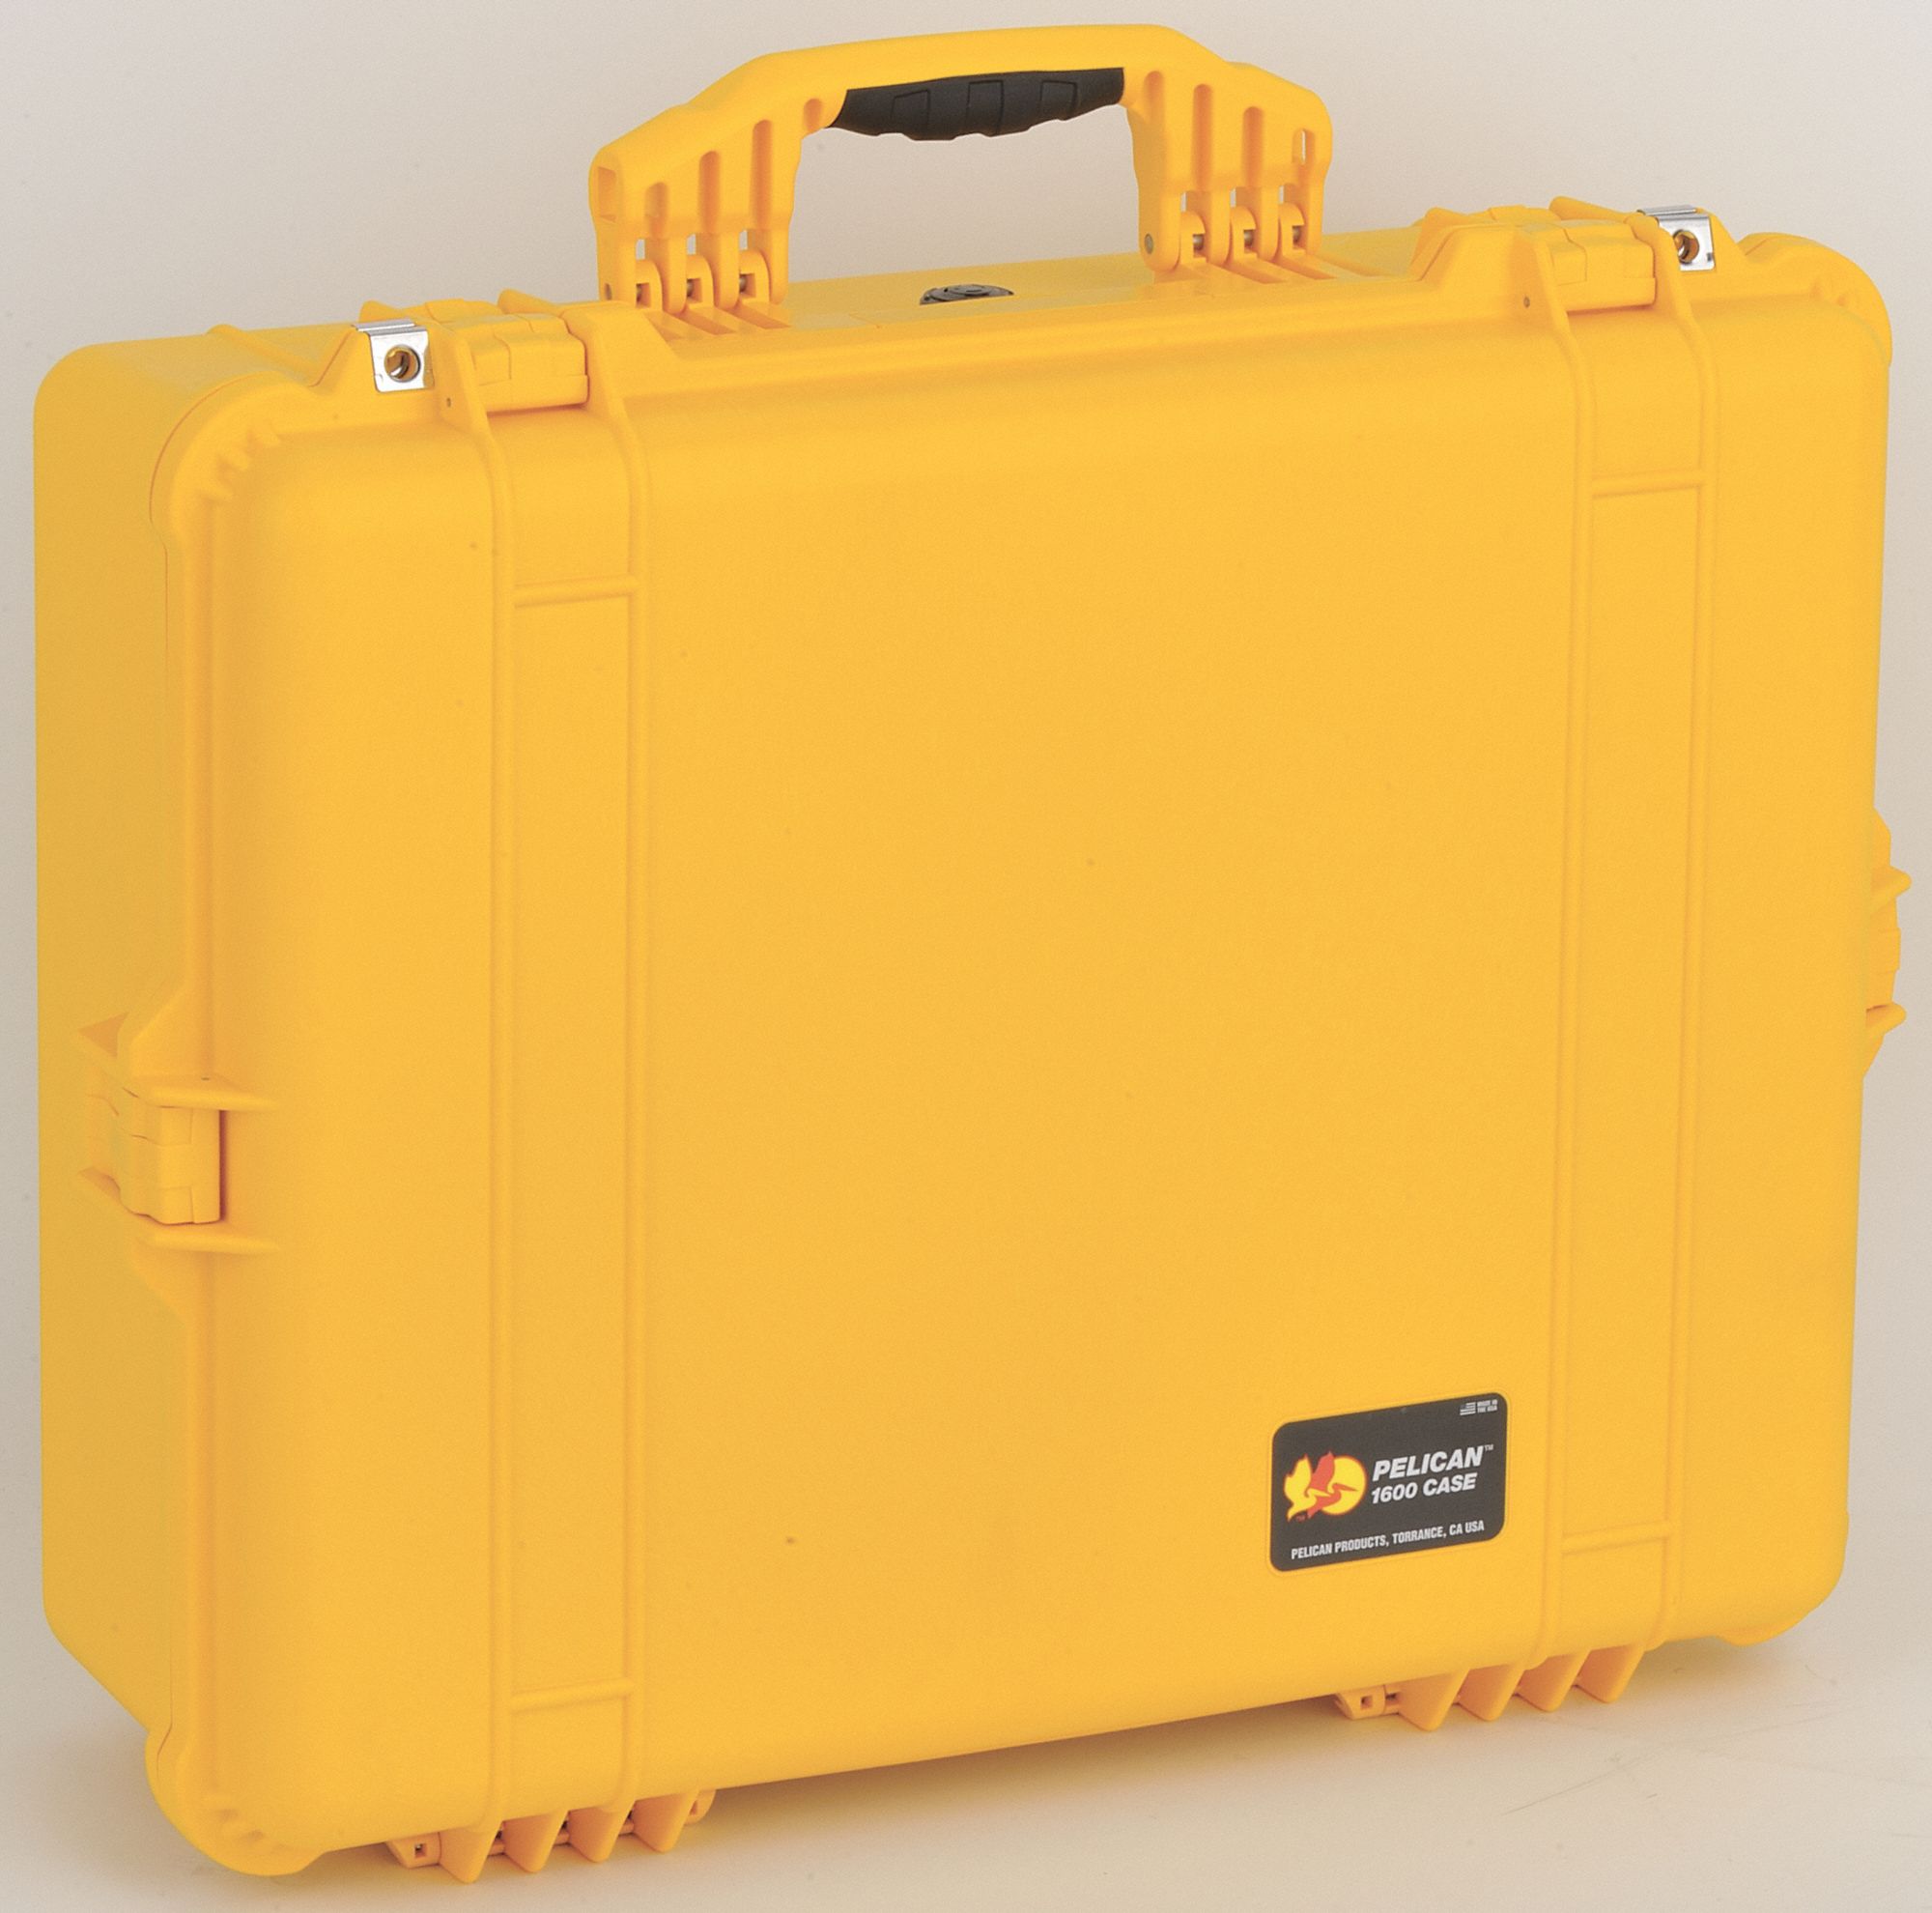 Protective Case, 24 1/4 in Overall Length, 19 1/2 in Overall Width, 8 3/4 in Overall Depth